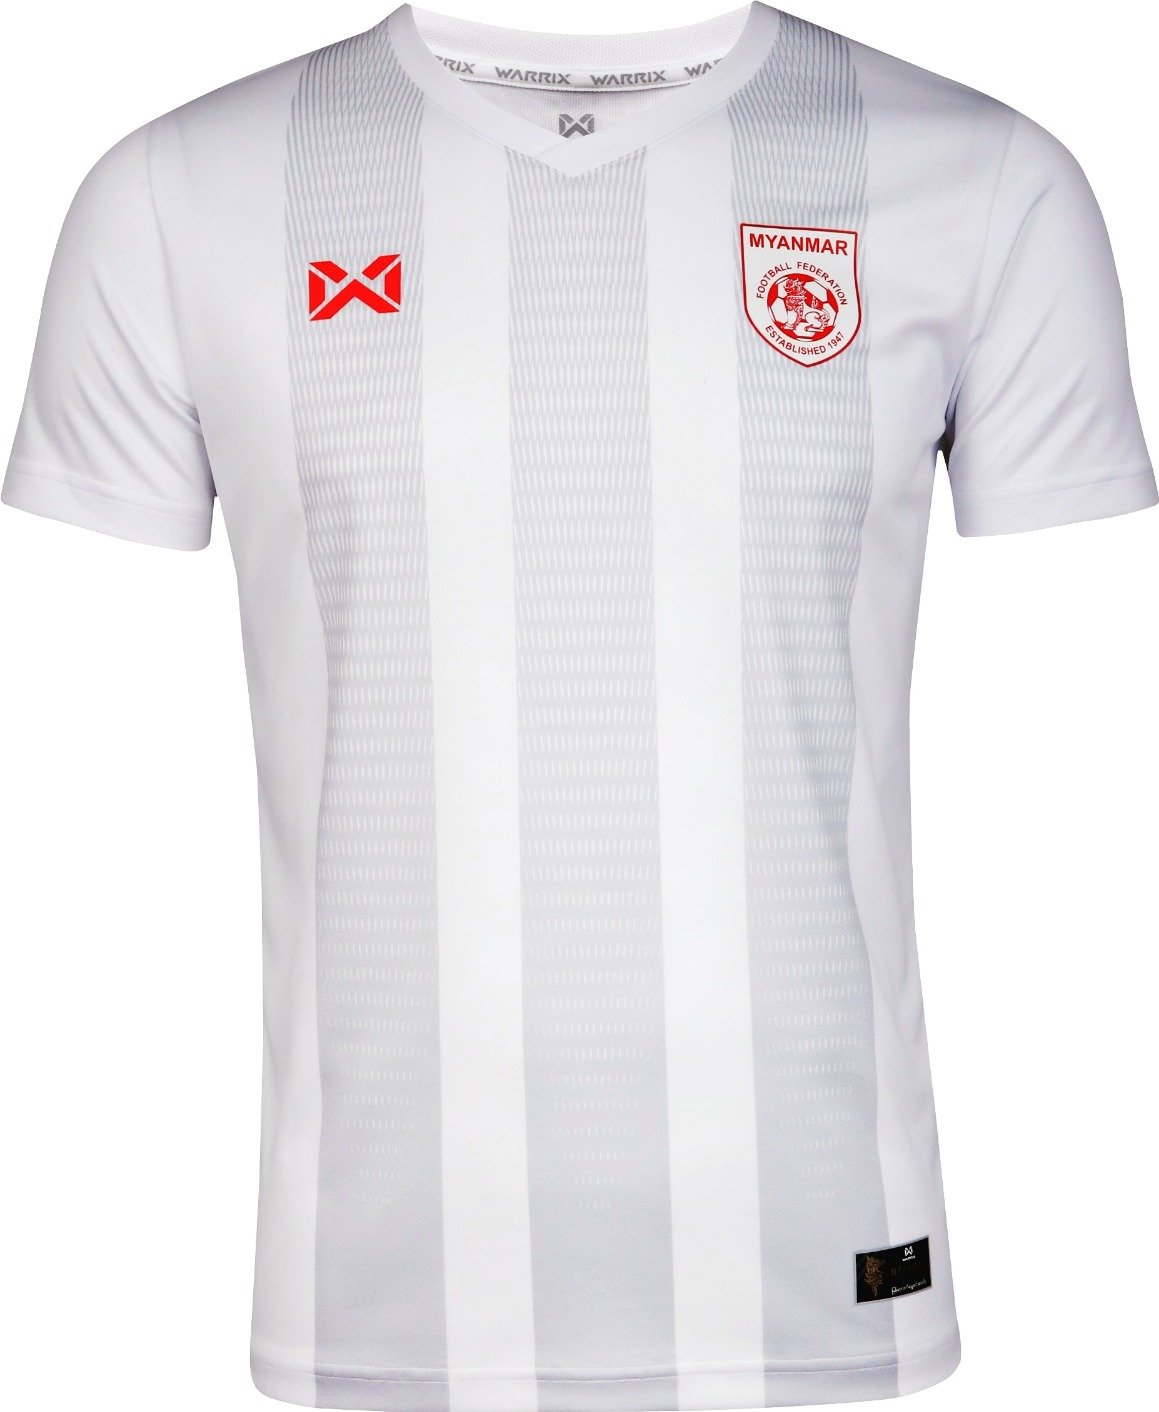 2020-2022 Myanmar National Team Football Soccer Authentic Genuine Jersey Shirt White